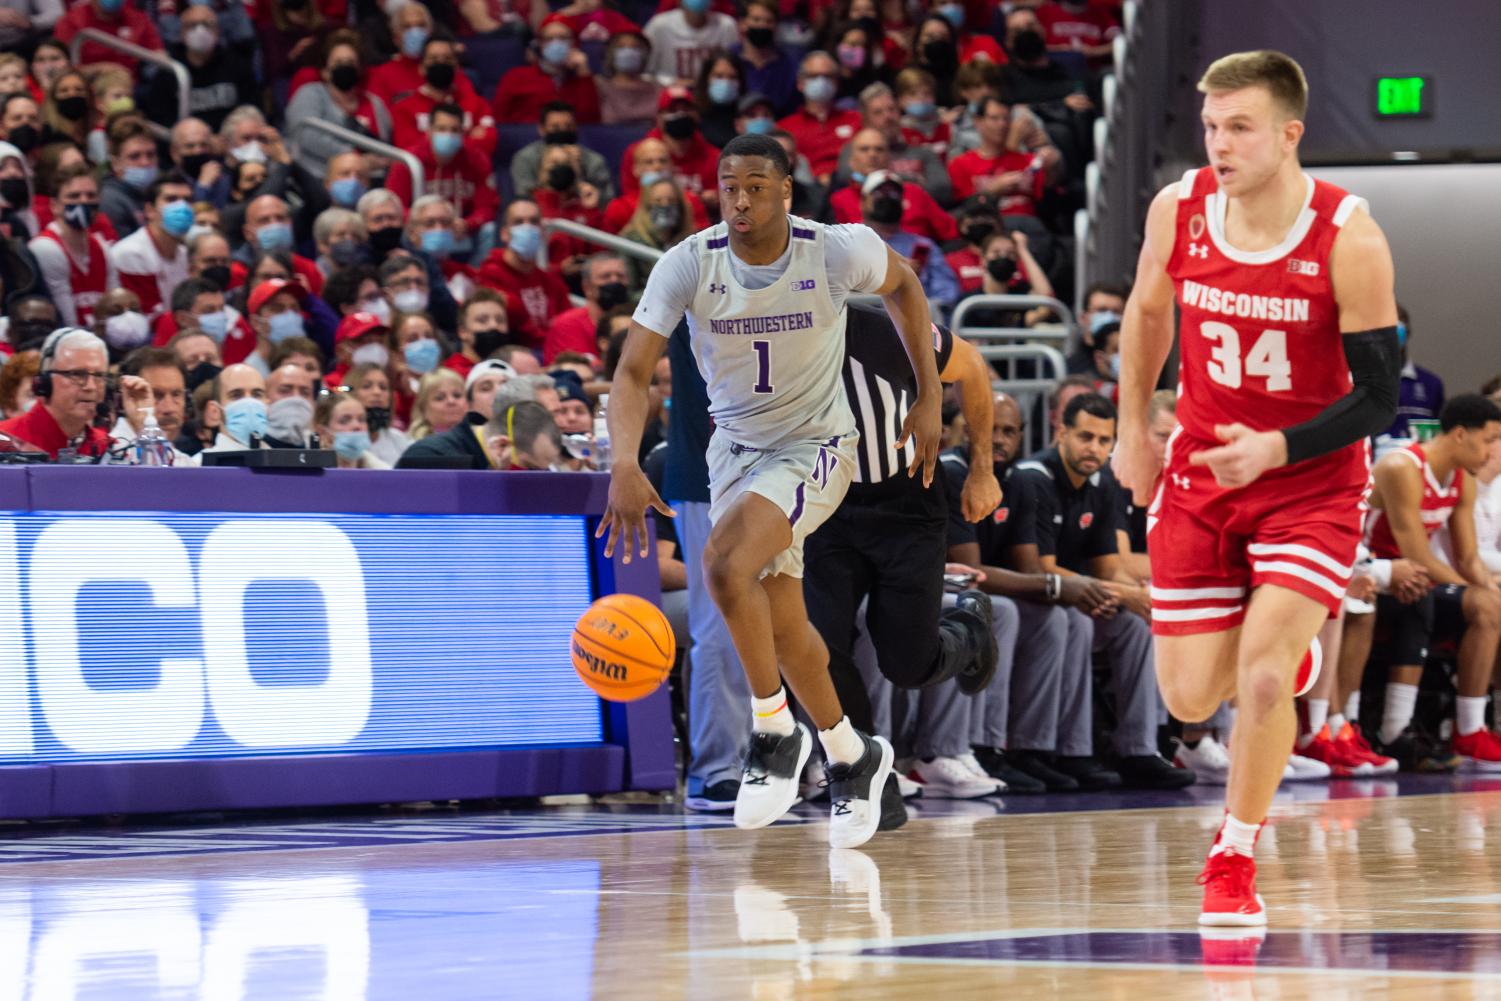 Chase+Audiges+dribbles+up+the+court.+Audige+had+a+team-high+23+points+in+Northwestern%E2%80%99s+82-76+loss+to+No.+8+Wisconsin.